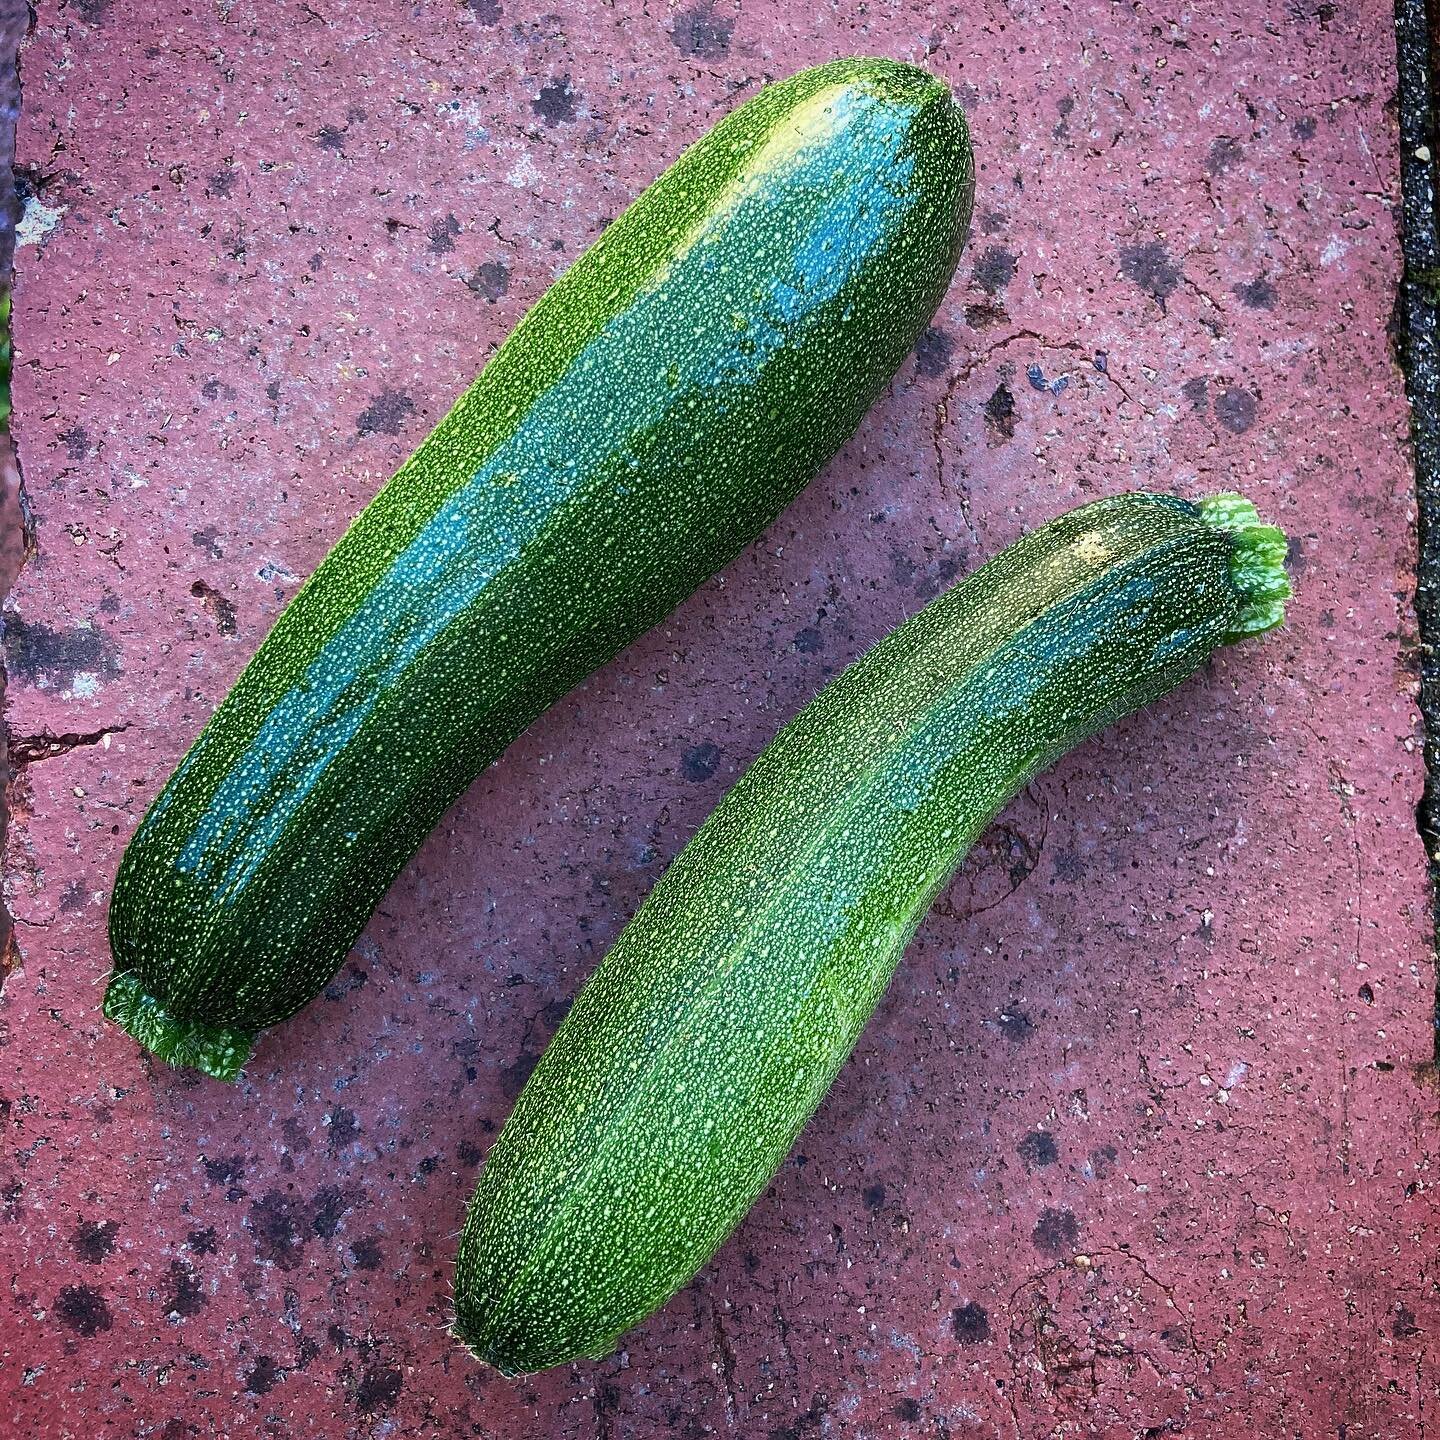 I have become ... a #courgette #farmer! In a small way obvs.